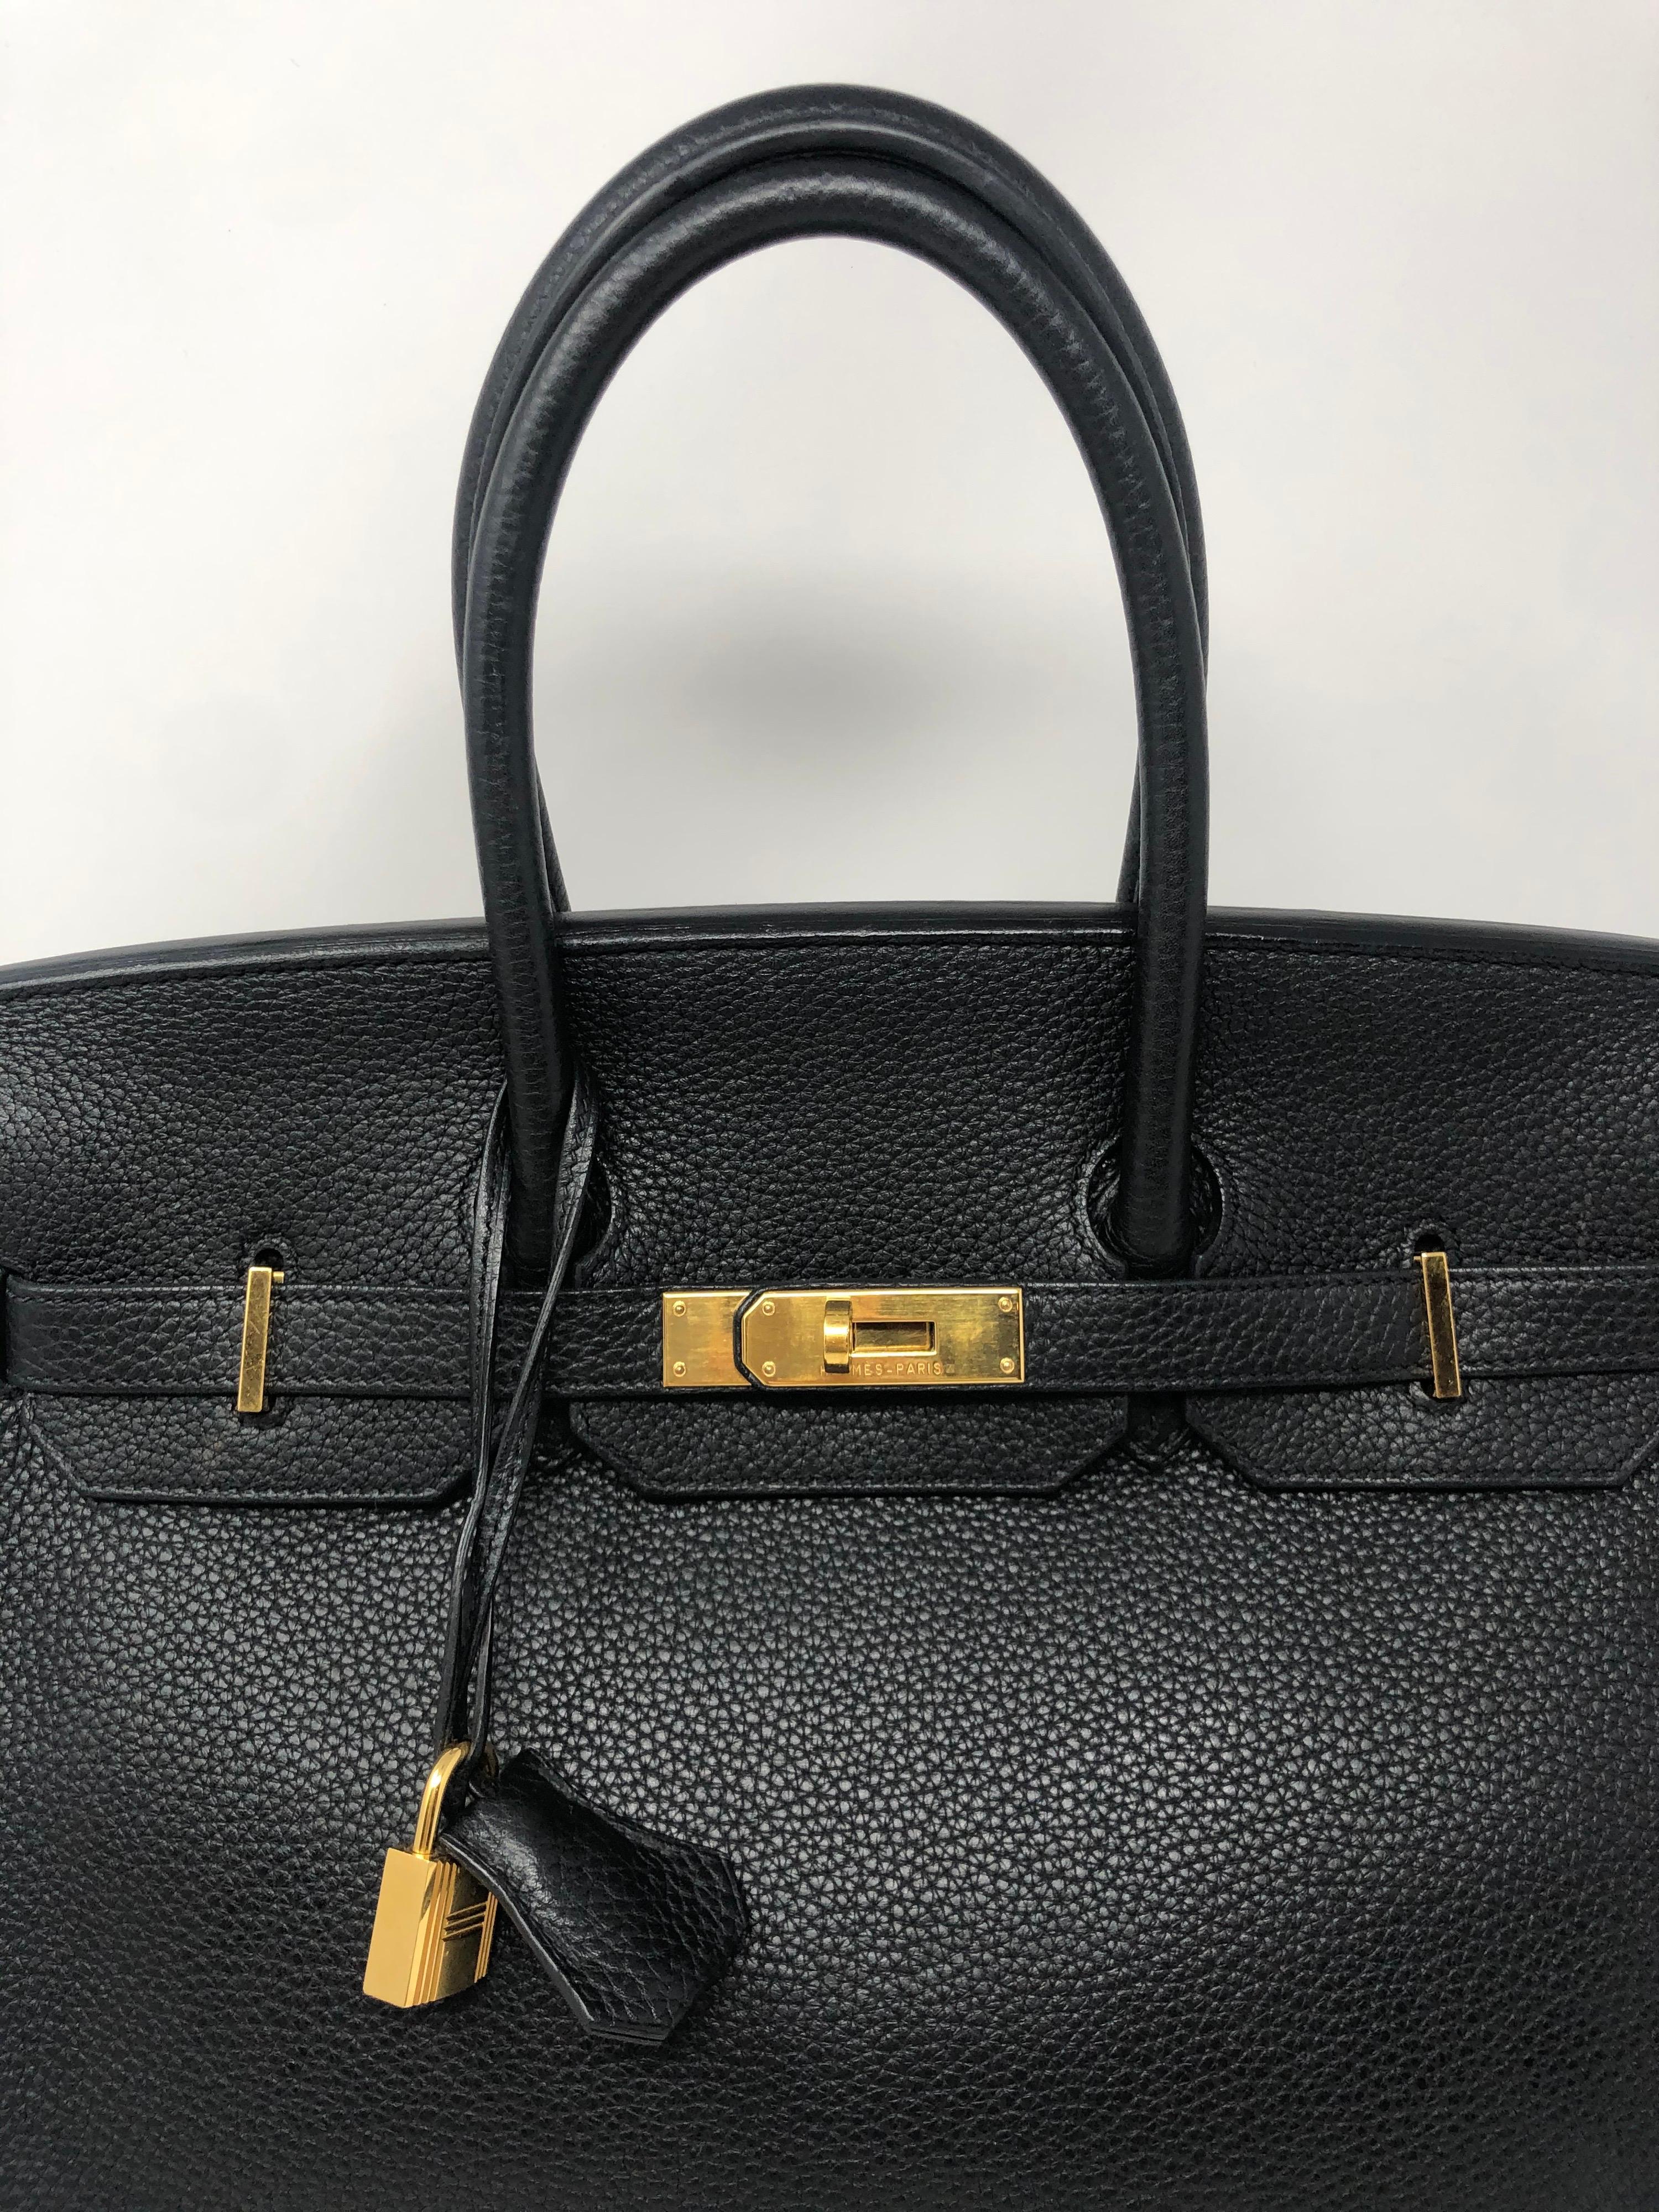 Hermes Black Birkin 35. Gold hardware. Good condition. From 2012. Hard combination to find Black and gold. Togo leather. Full set included. Dust cover, box, clochette, lock and keys. Guaranteed authentic. 